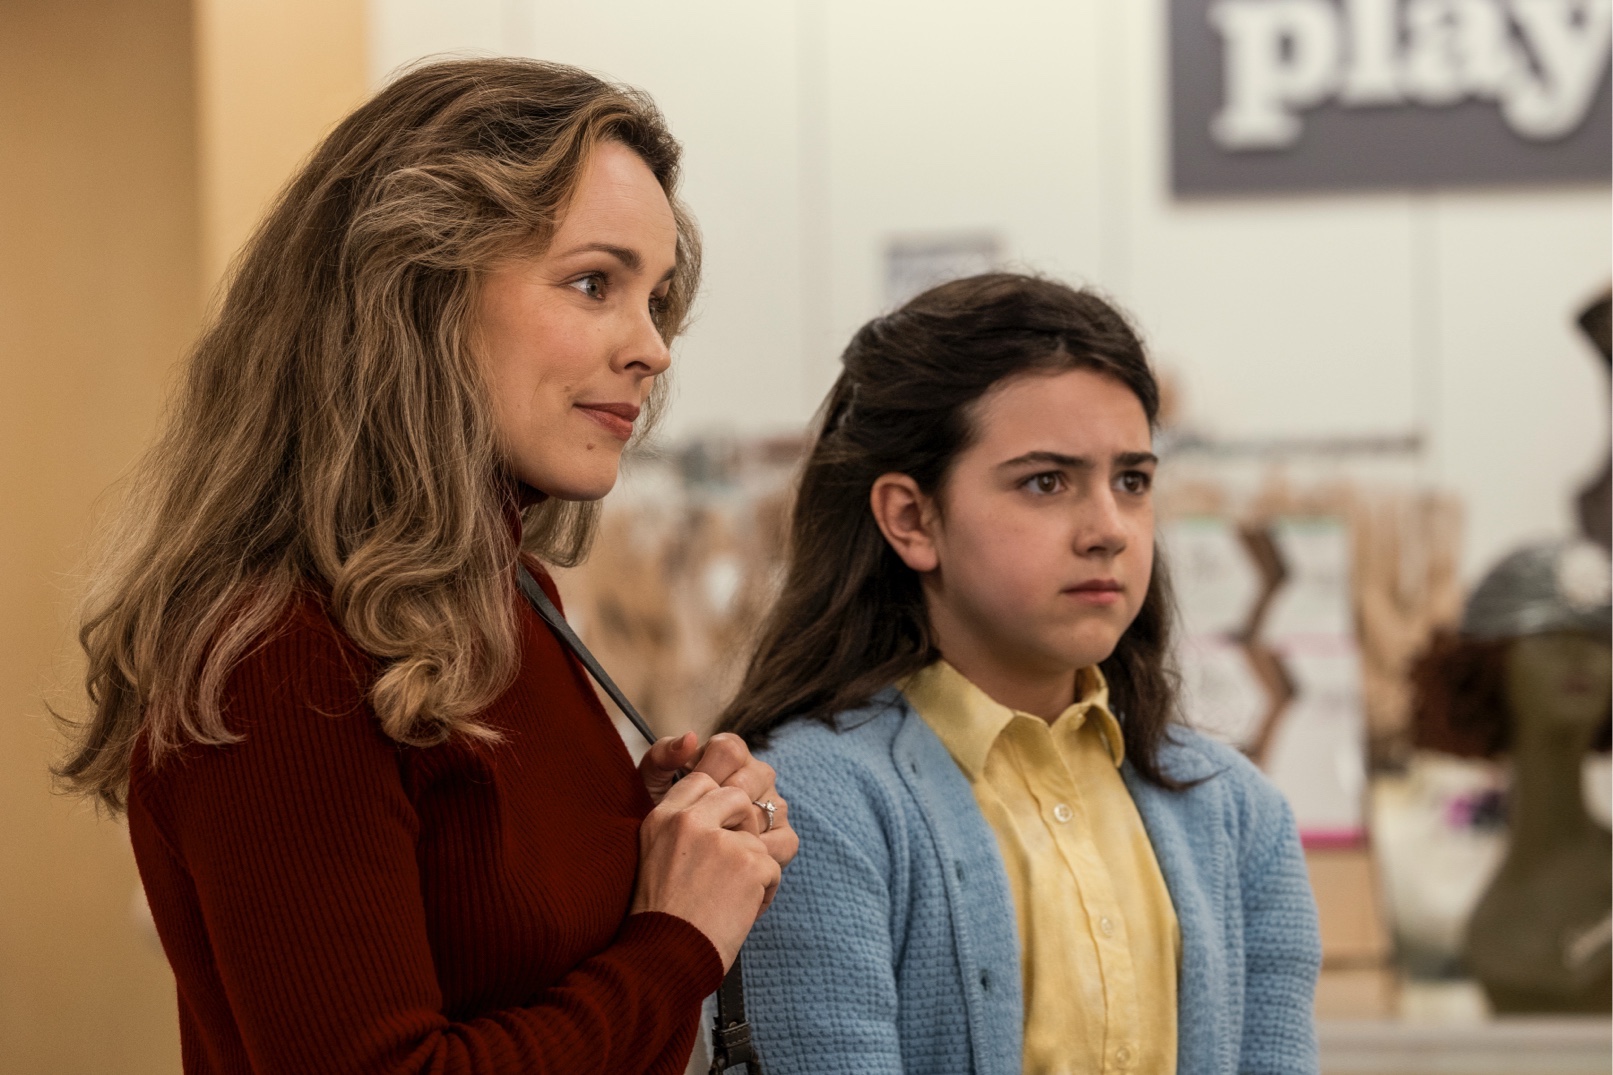 Rachel McAdams and Abby Ryder Fortson in 'Are You There God? It’s Me, Margaret' (Courtesy of Lionsgate)